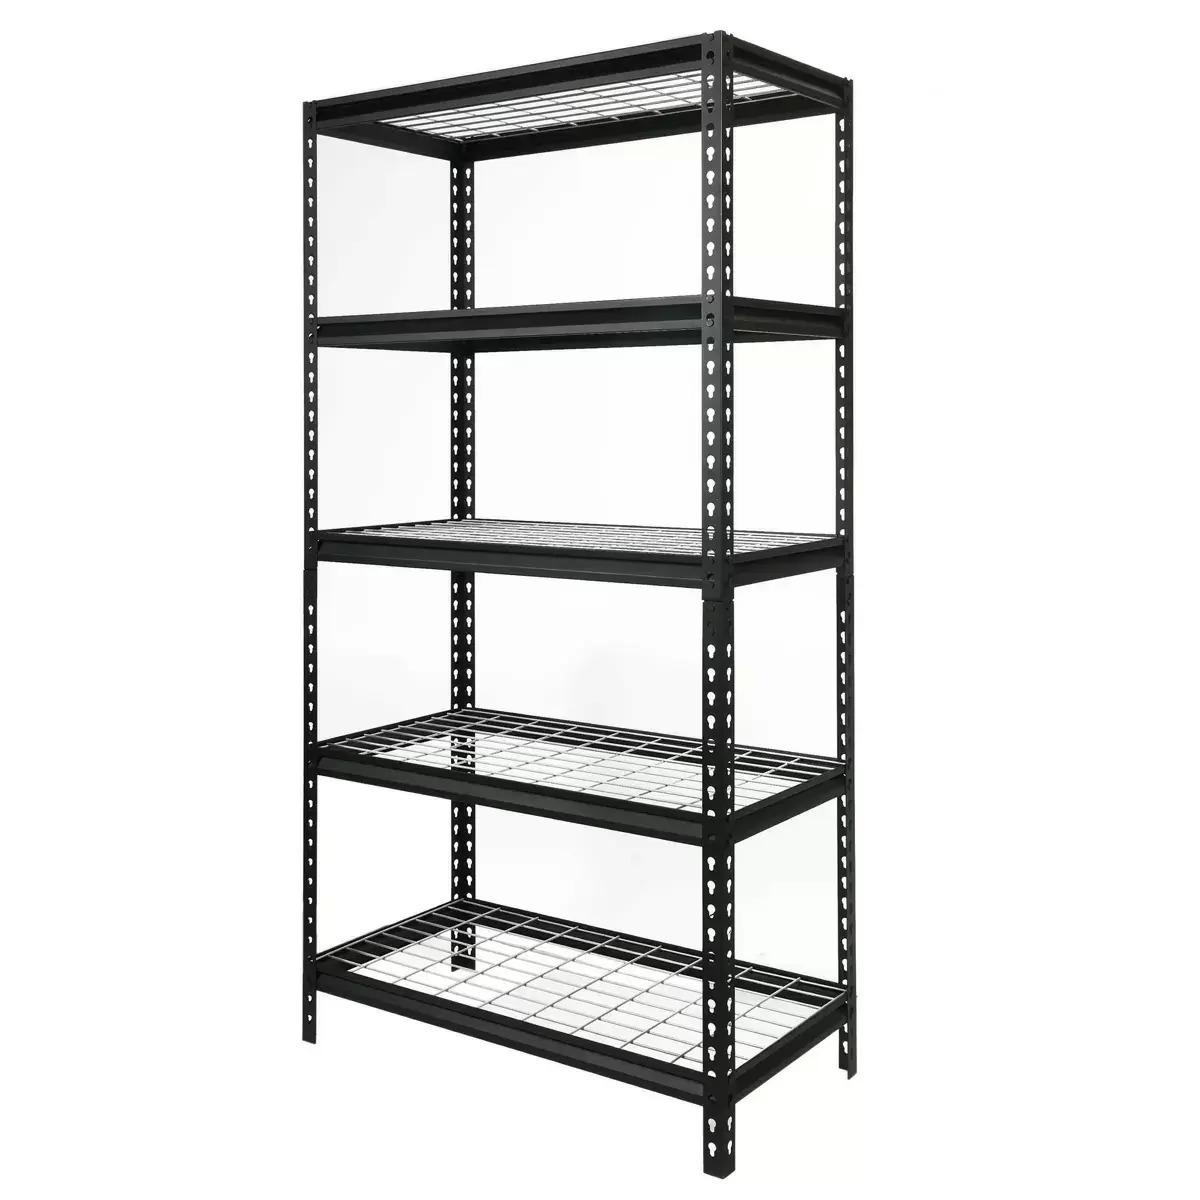 Workpro 36in 5-Tier Freestanding Shelves for $69 Shipped